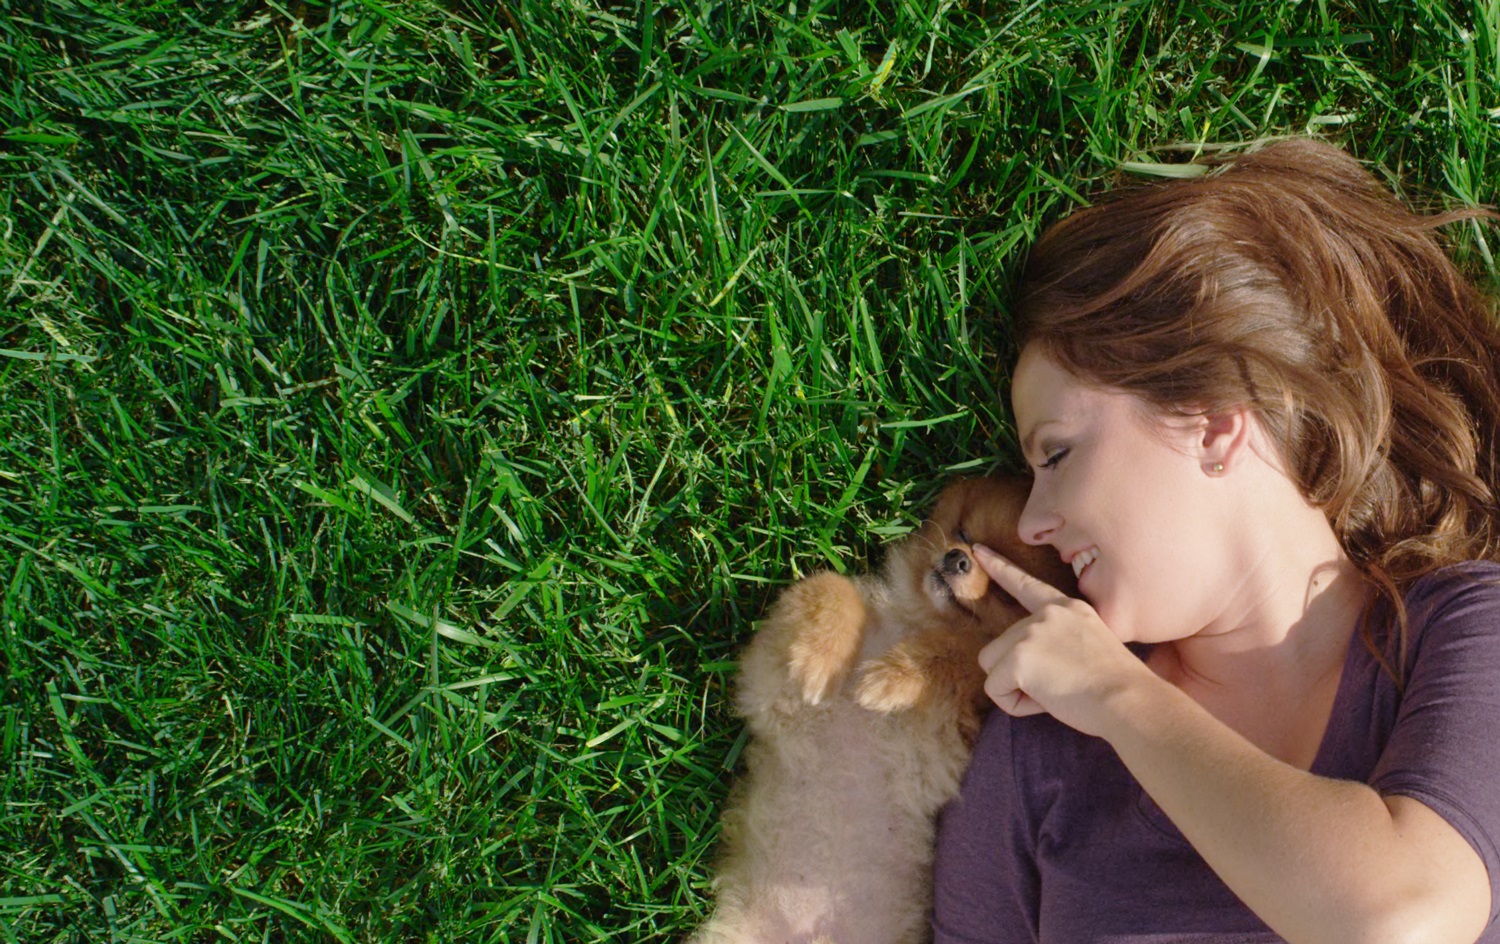 Pretty Woman playing with cute puppy on manicured green grass showing lawn care in Buffalo